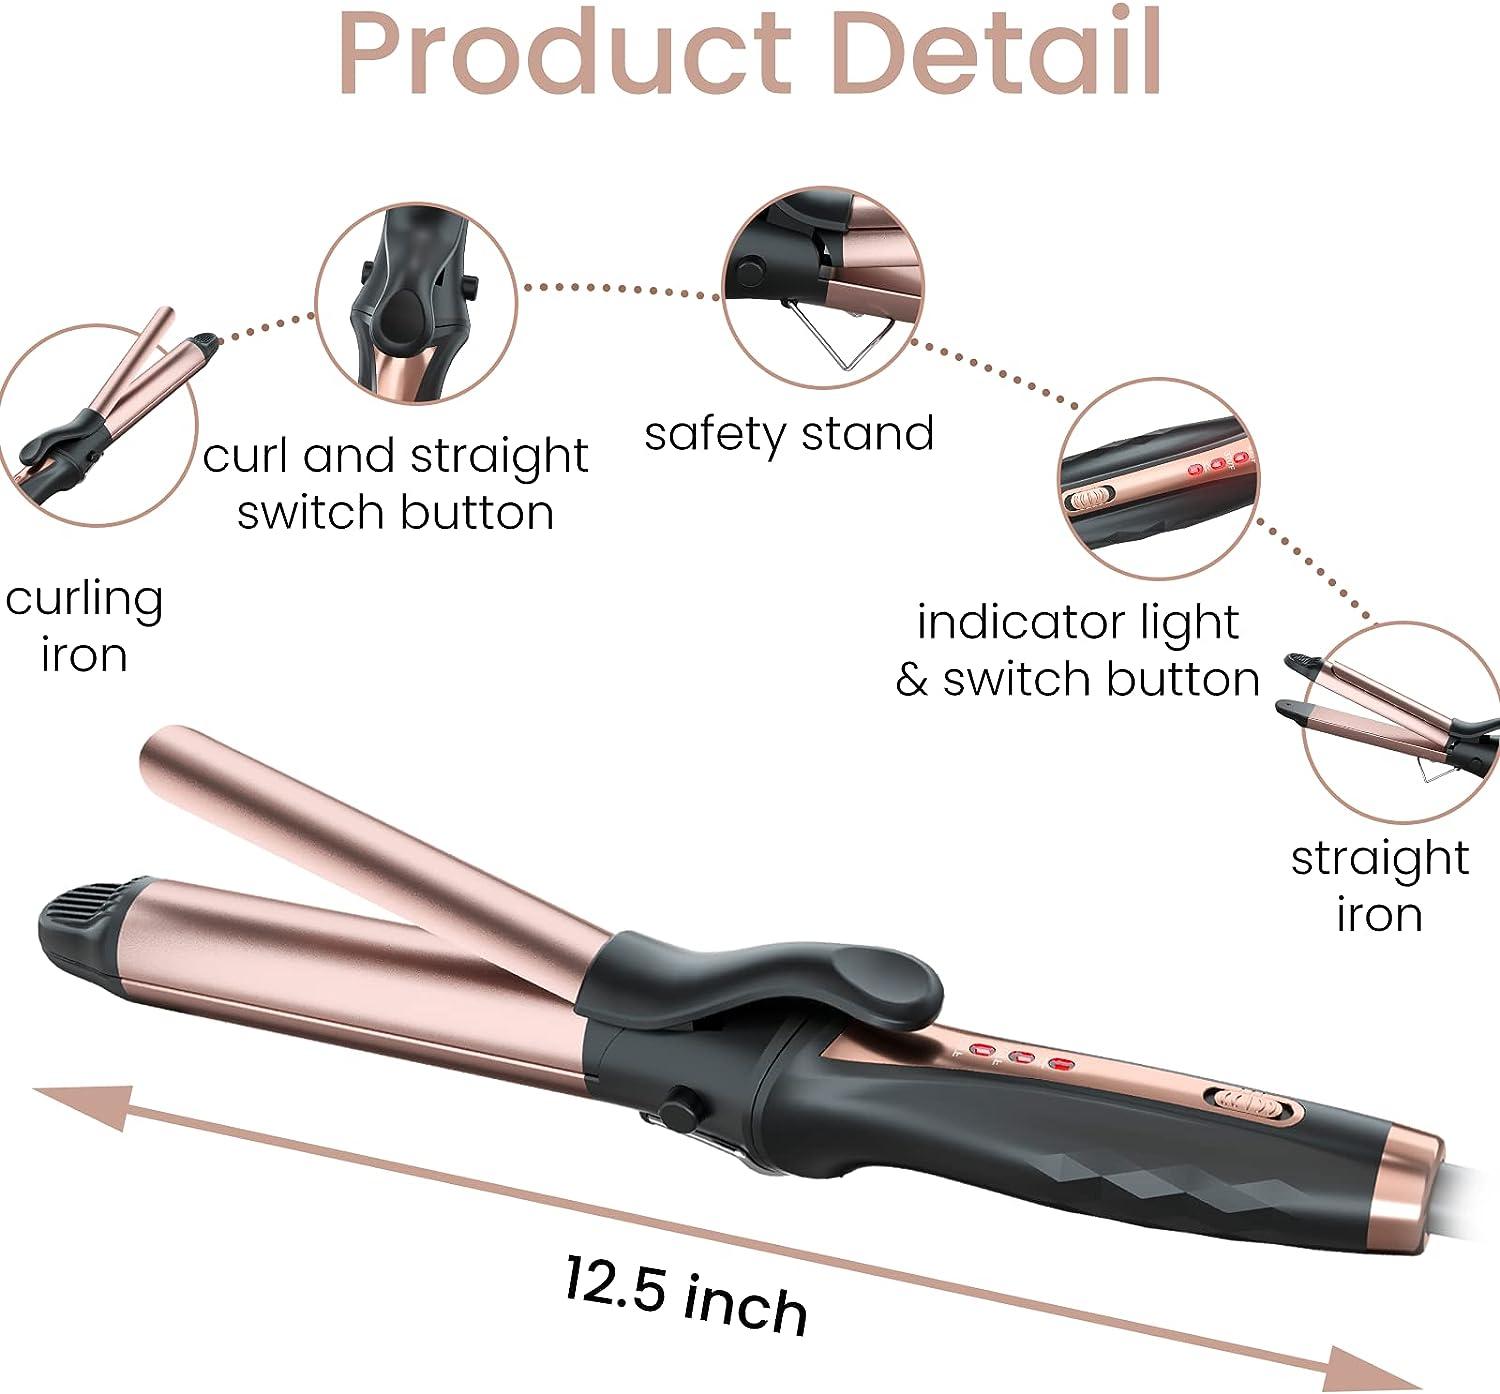 Travel Curling Flat Iron 2 in 1 1 1/4 Inch Hair Curler Iron Ceramic Barrel  Professional Straightener Curling Wand with Adjustable Temperature